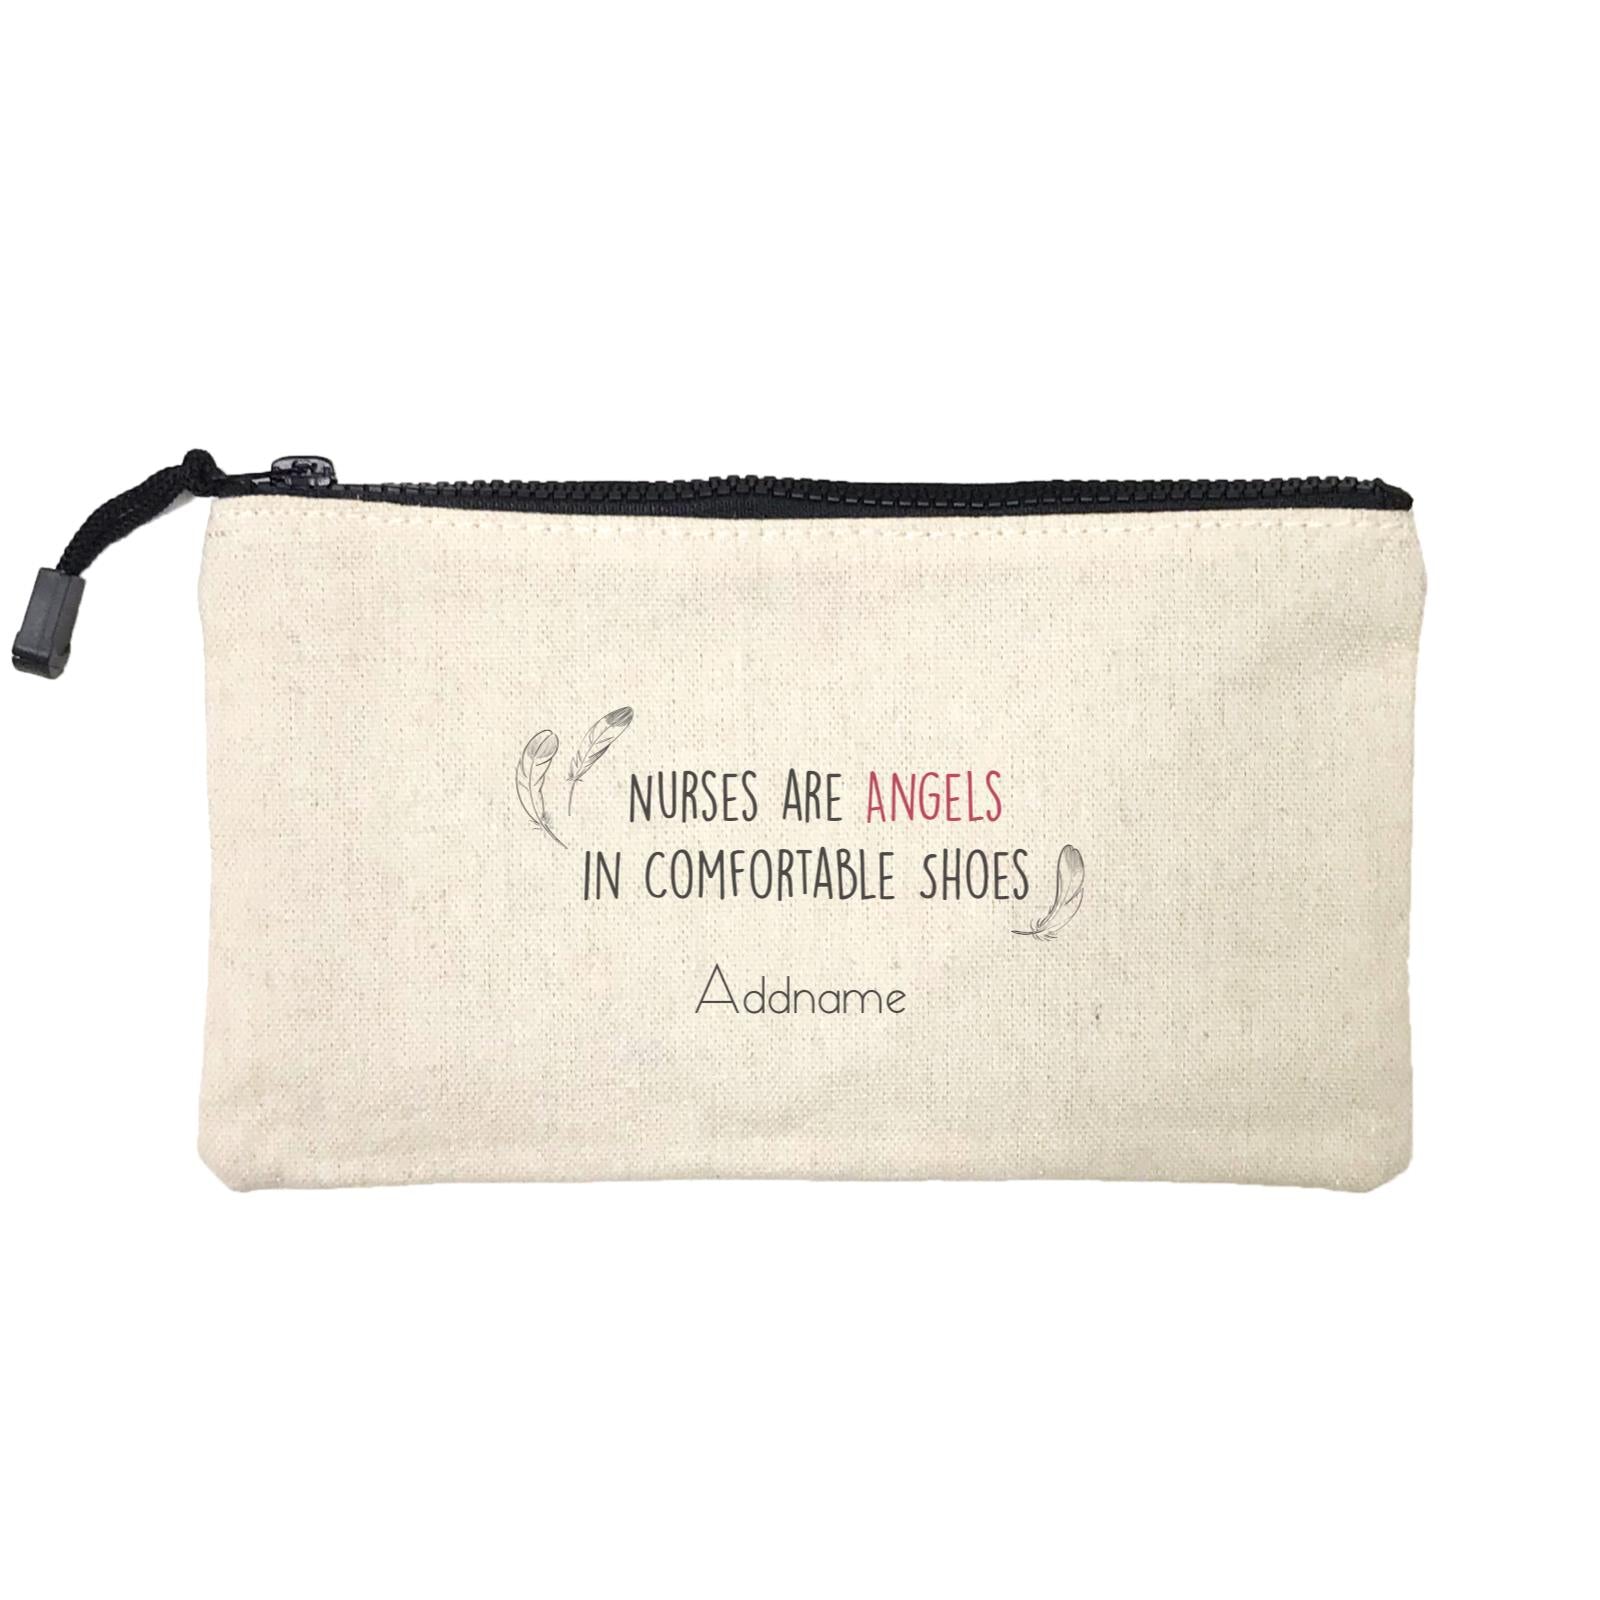 Nurses Are Angels In Comfortable Shoes Mini Accessories Stationery Pouch